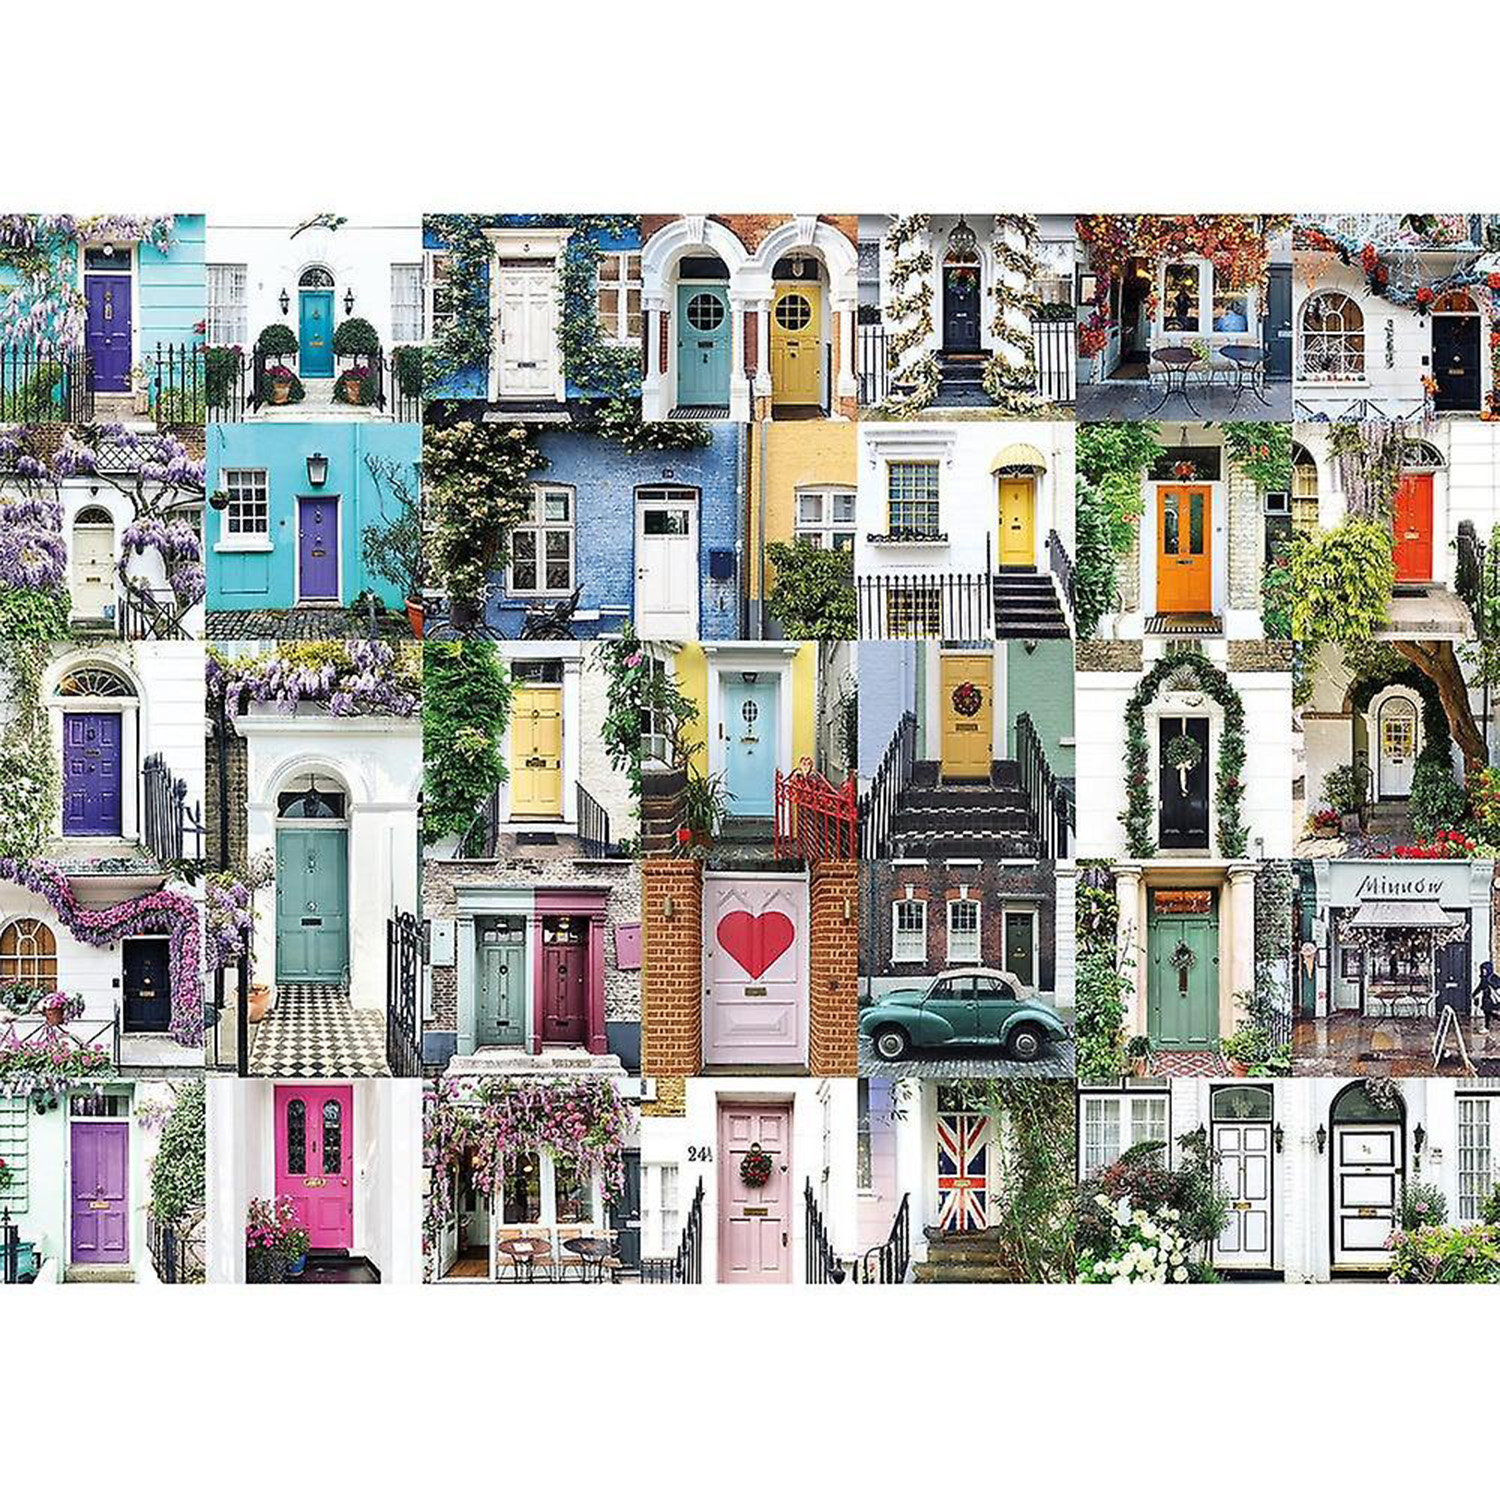 The Doors of London Collage Jigsaw Puzzle